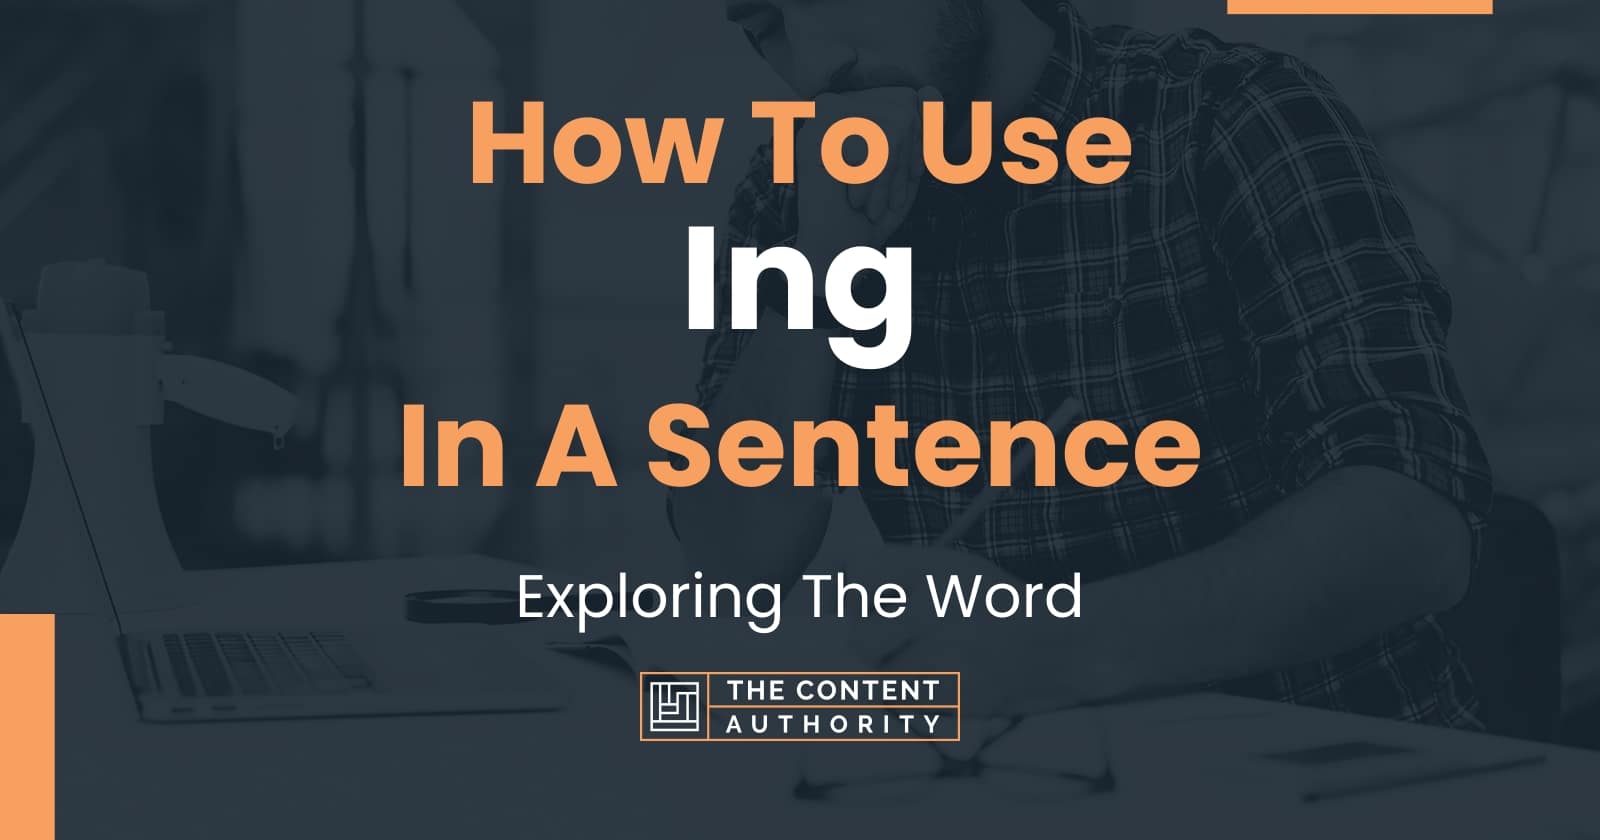 Where To Use Ing In A Sentence